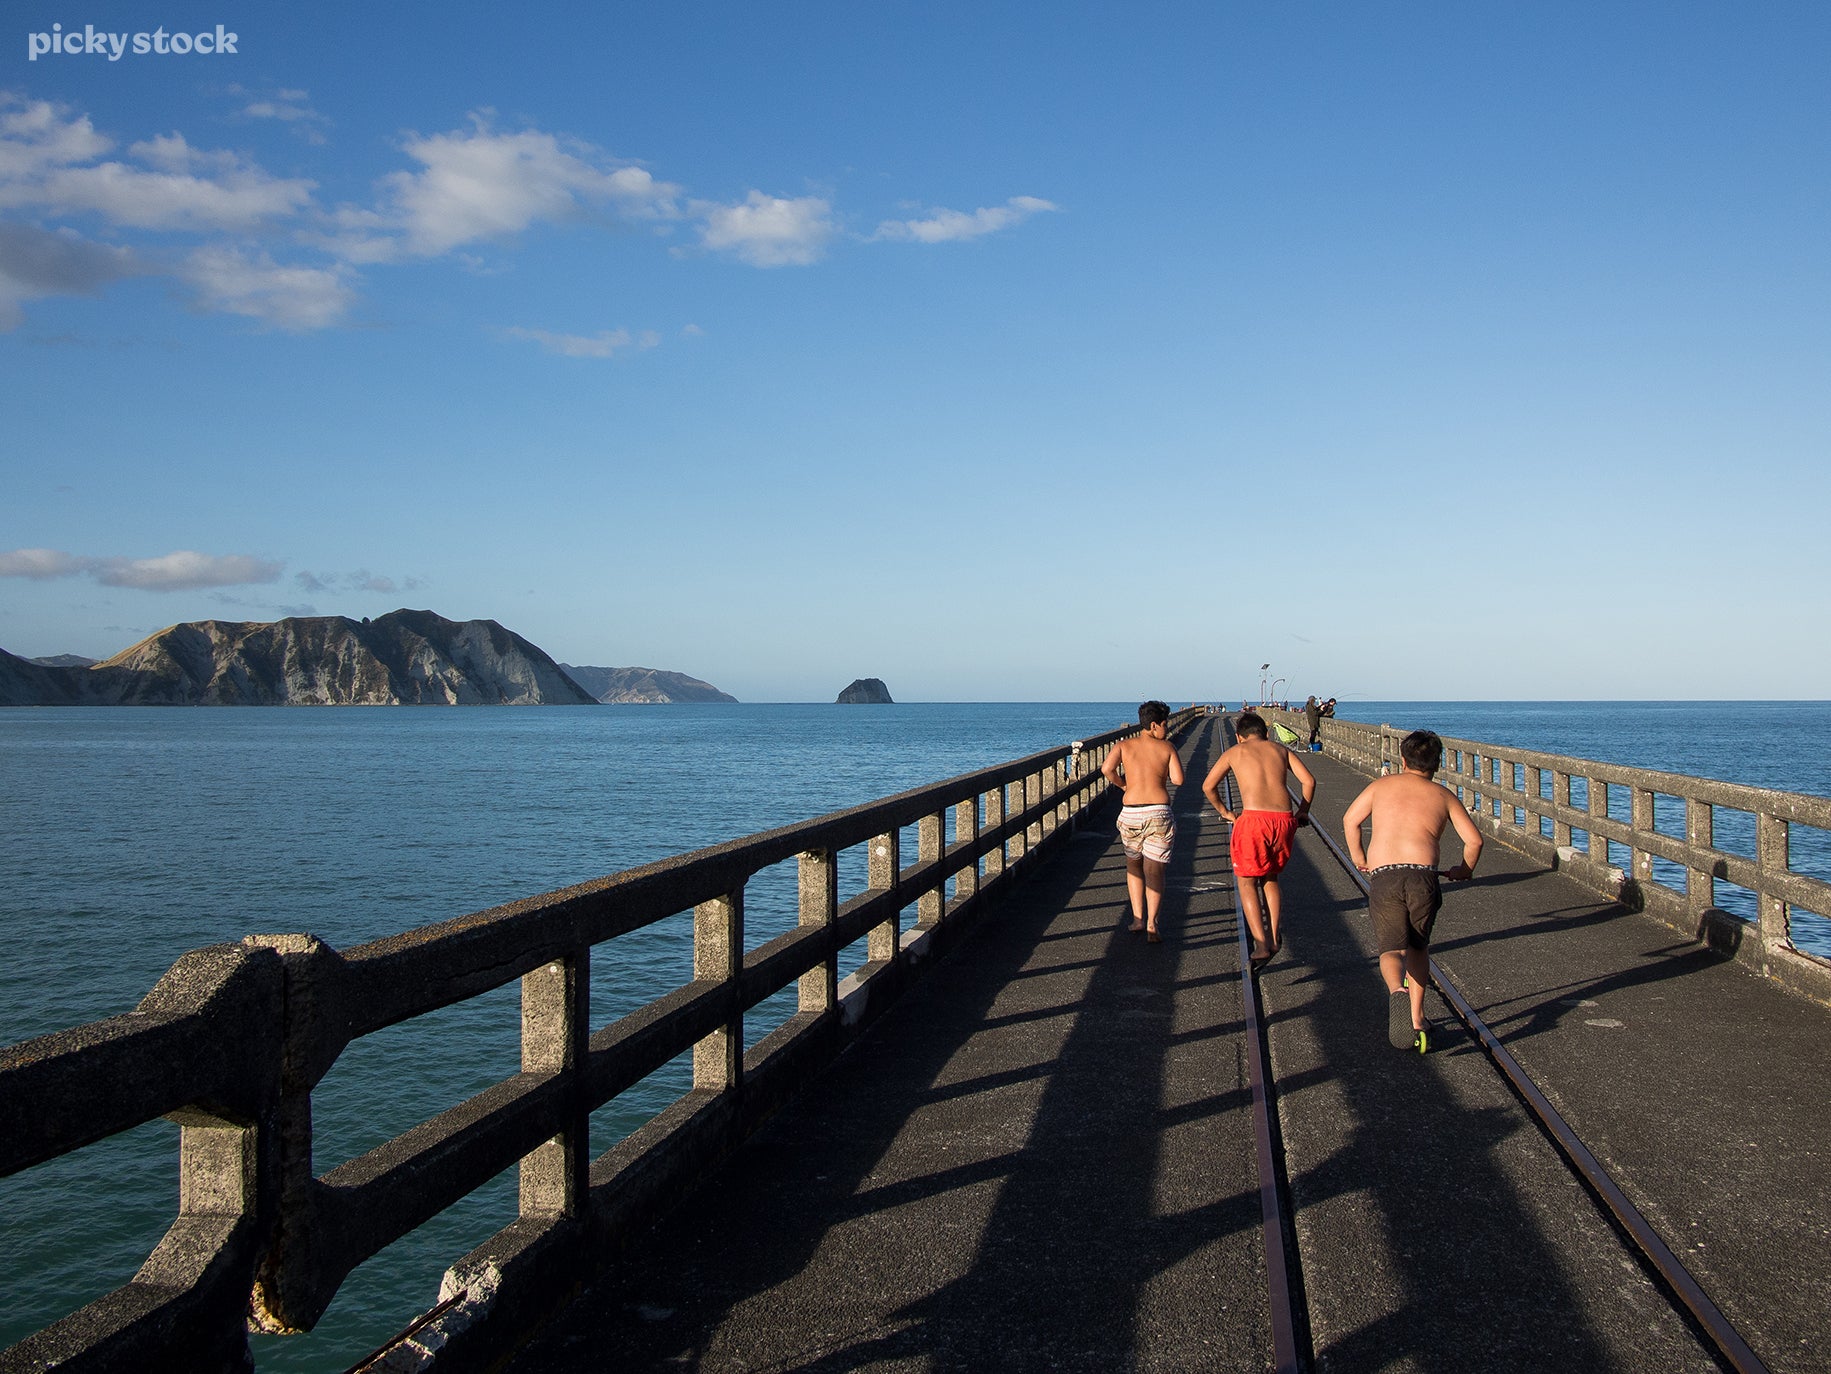 A landscape of three young people running down a concrete jetty towards the water. The sky is bright and shines dull against the concrete handrails and white cliffs.